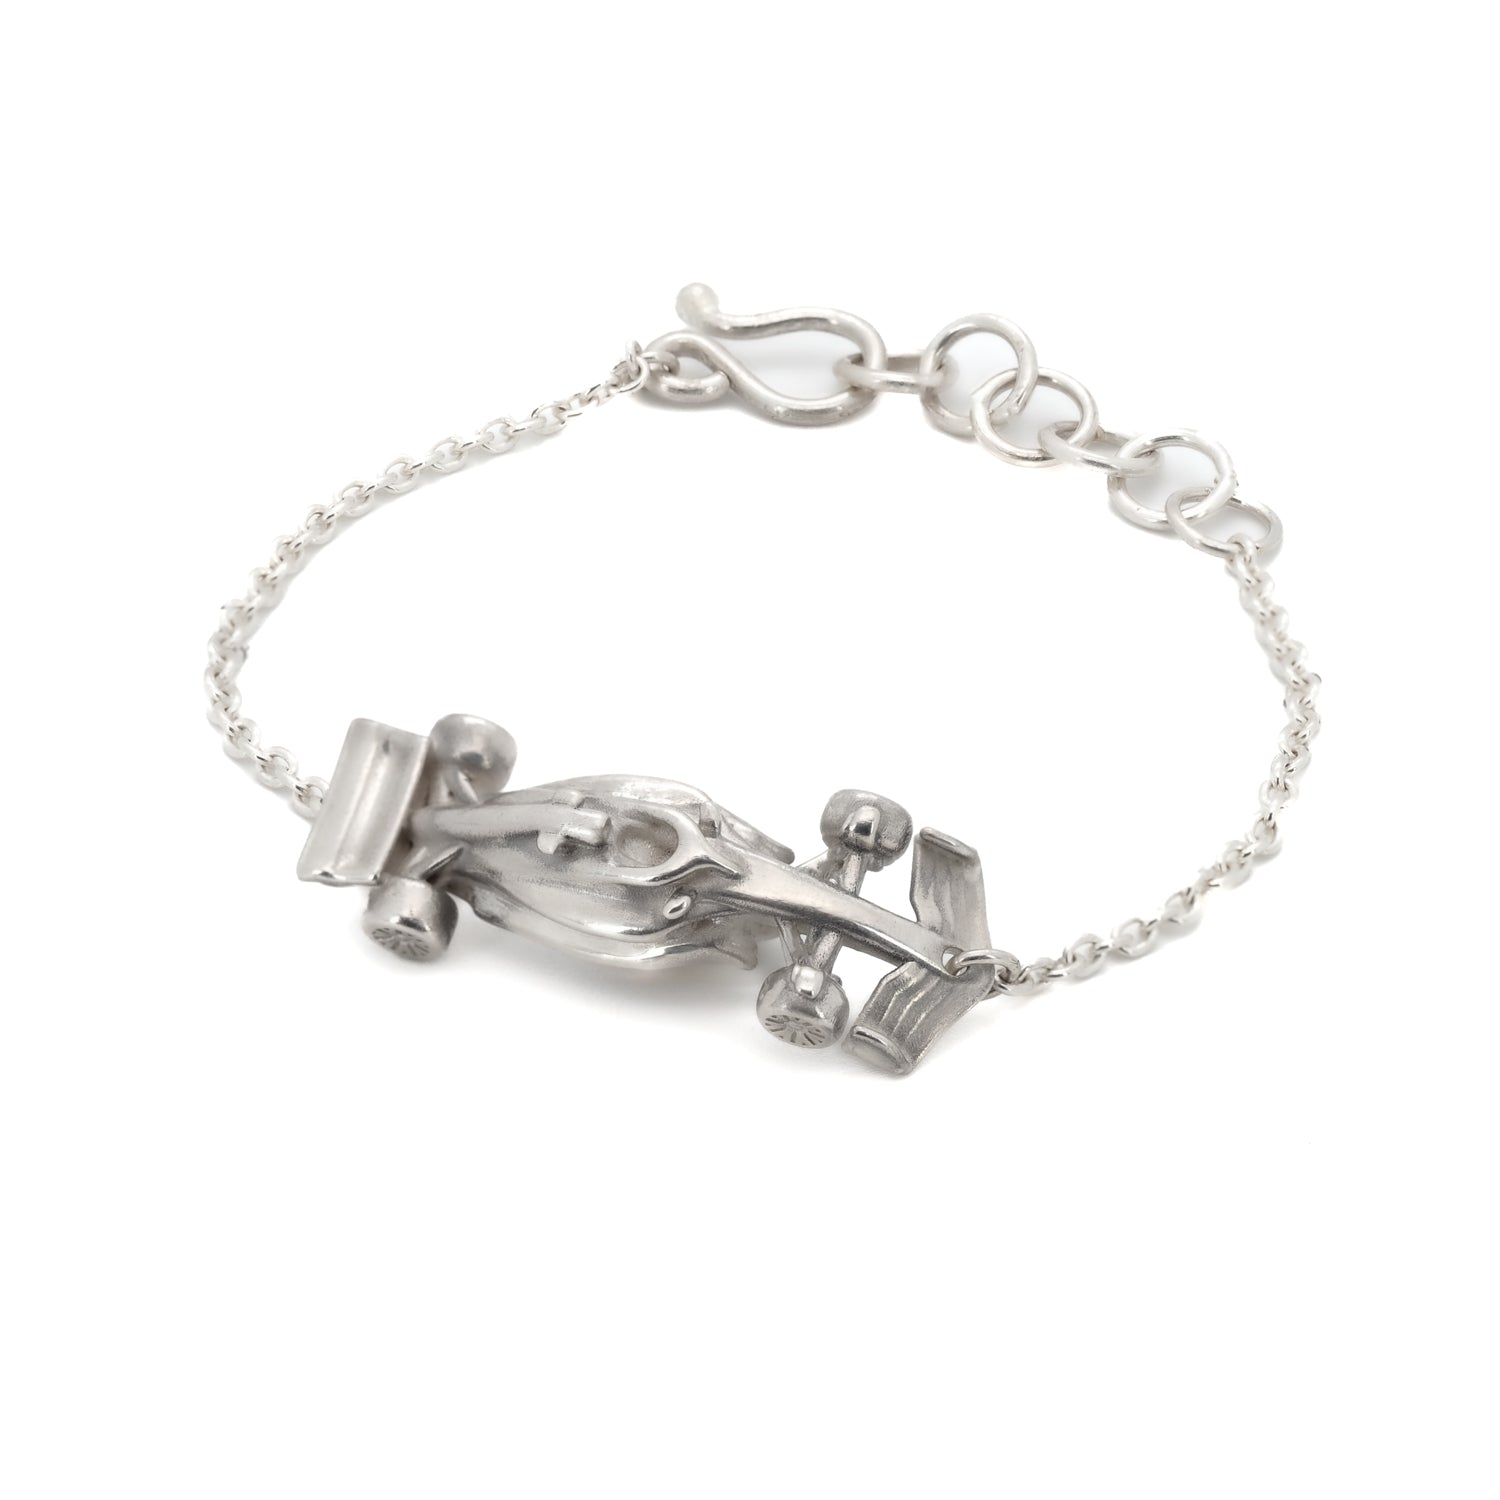 Taru Jewelry Race Car Bracelet is a stunning piece that captures the essence of speed and adrenaline. Crafted from sterling silver, this bracelet features a sleek and aerodynamic race car design complete with intricate details. The streamlined body of the car creates a sense of movement and energy. The wheels of the car are finely detailed and perfectly balanced, ready to take on any race course. The curvature of the car allows the bracelet to hug around the contours of the wrist perfectly.